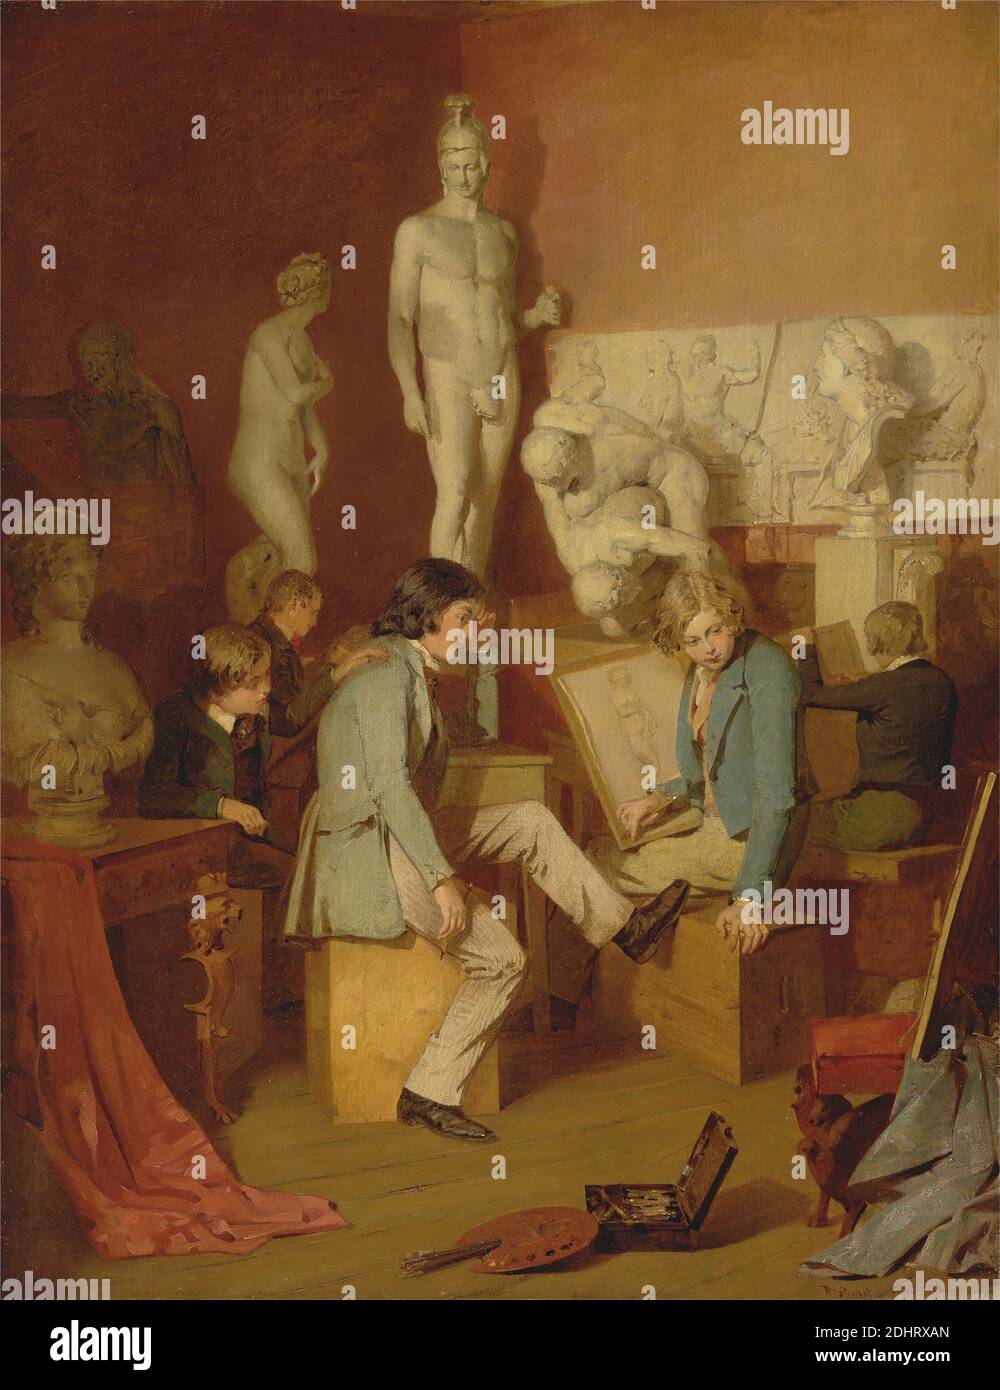 Interior of an Academy: The Critics, William Stewart, active 1847–1856, British, 1848, Oil on canvas, Support (PTG): 32 x 24 1/2 inches (81.3 x 62.2 cm), academy, ancient, art, boys, busts, casts, coats, crates, critics, dog (animal), drawing, education, frieze (entablature component), Greek, interior, paint box, painting (visual work), paints, palette, Parthenon, plaster, plaster casts, Roman, school, sketchbook, sketches, sketching, statues, students, tables, trousers, wrestlers Stock Photo